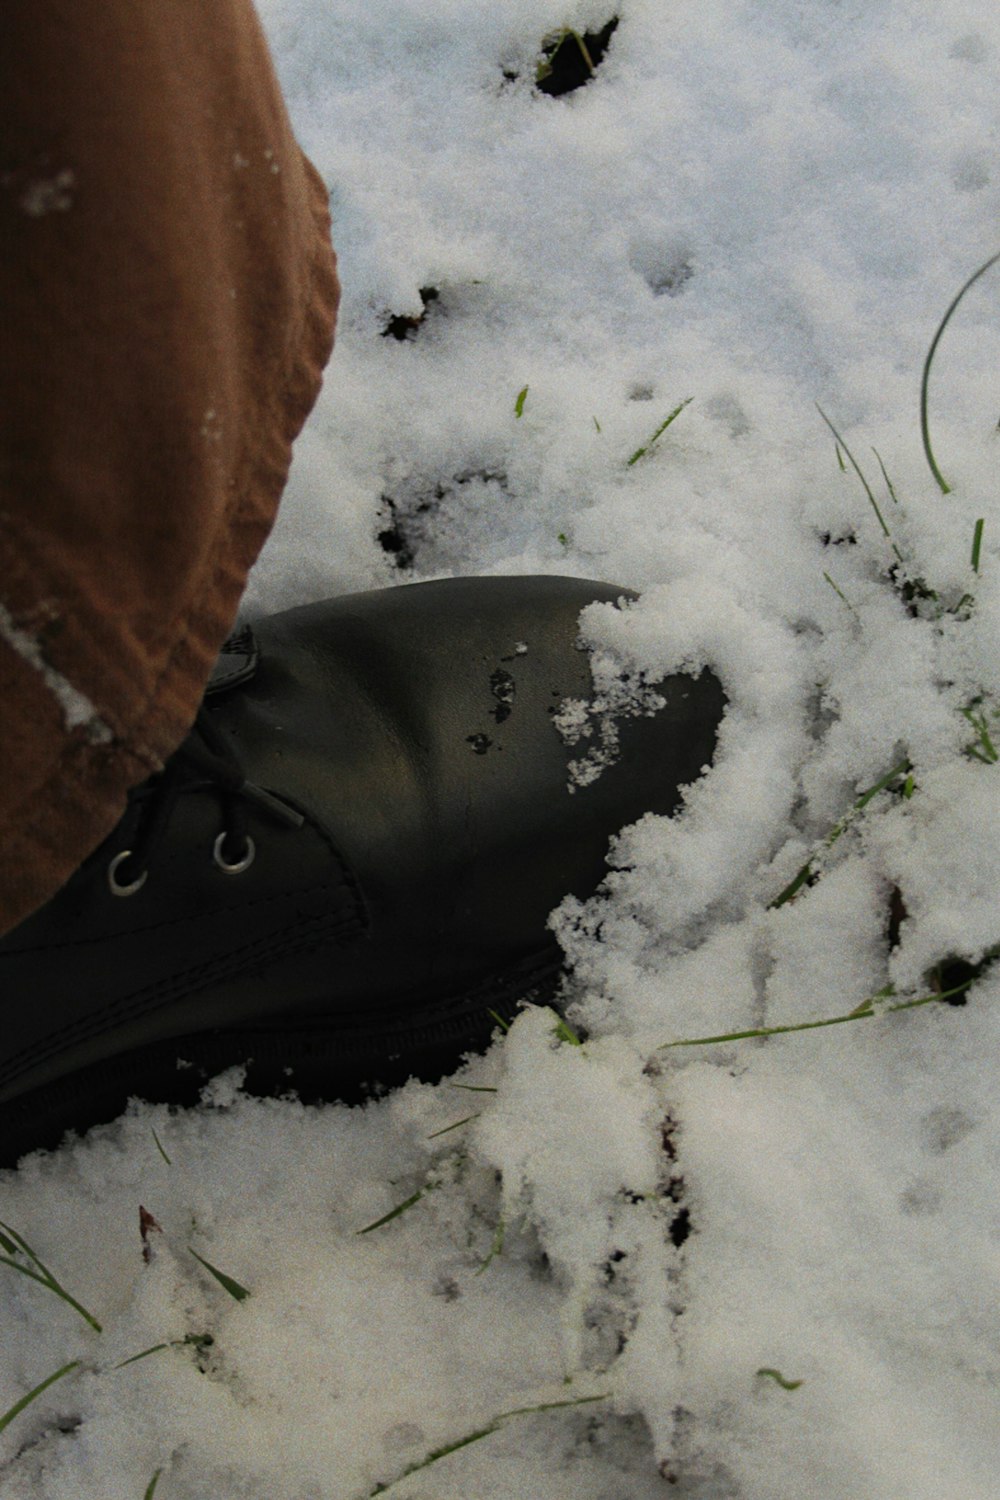 a person standing in the snow wearing black boots